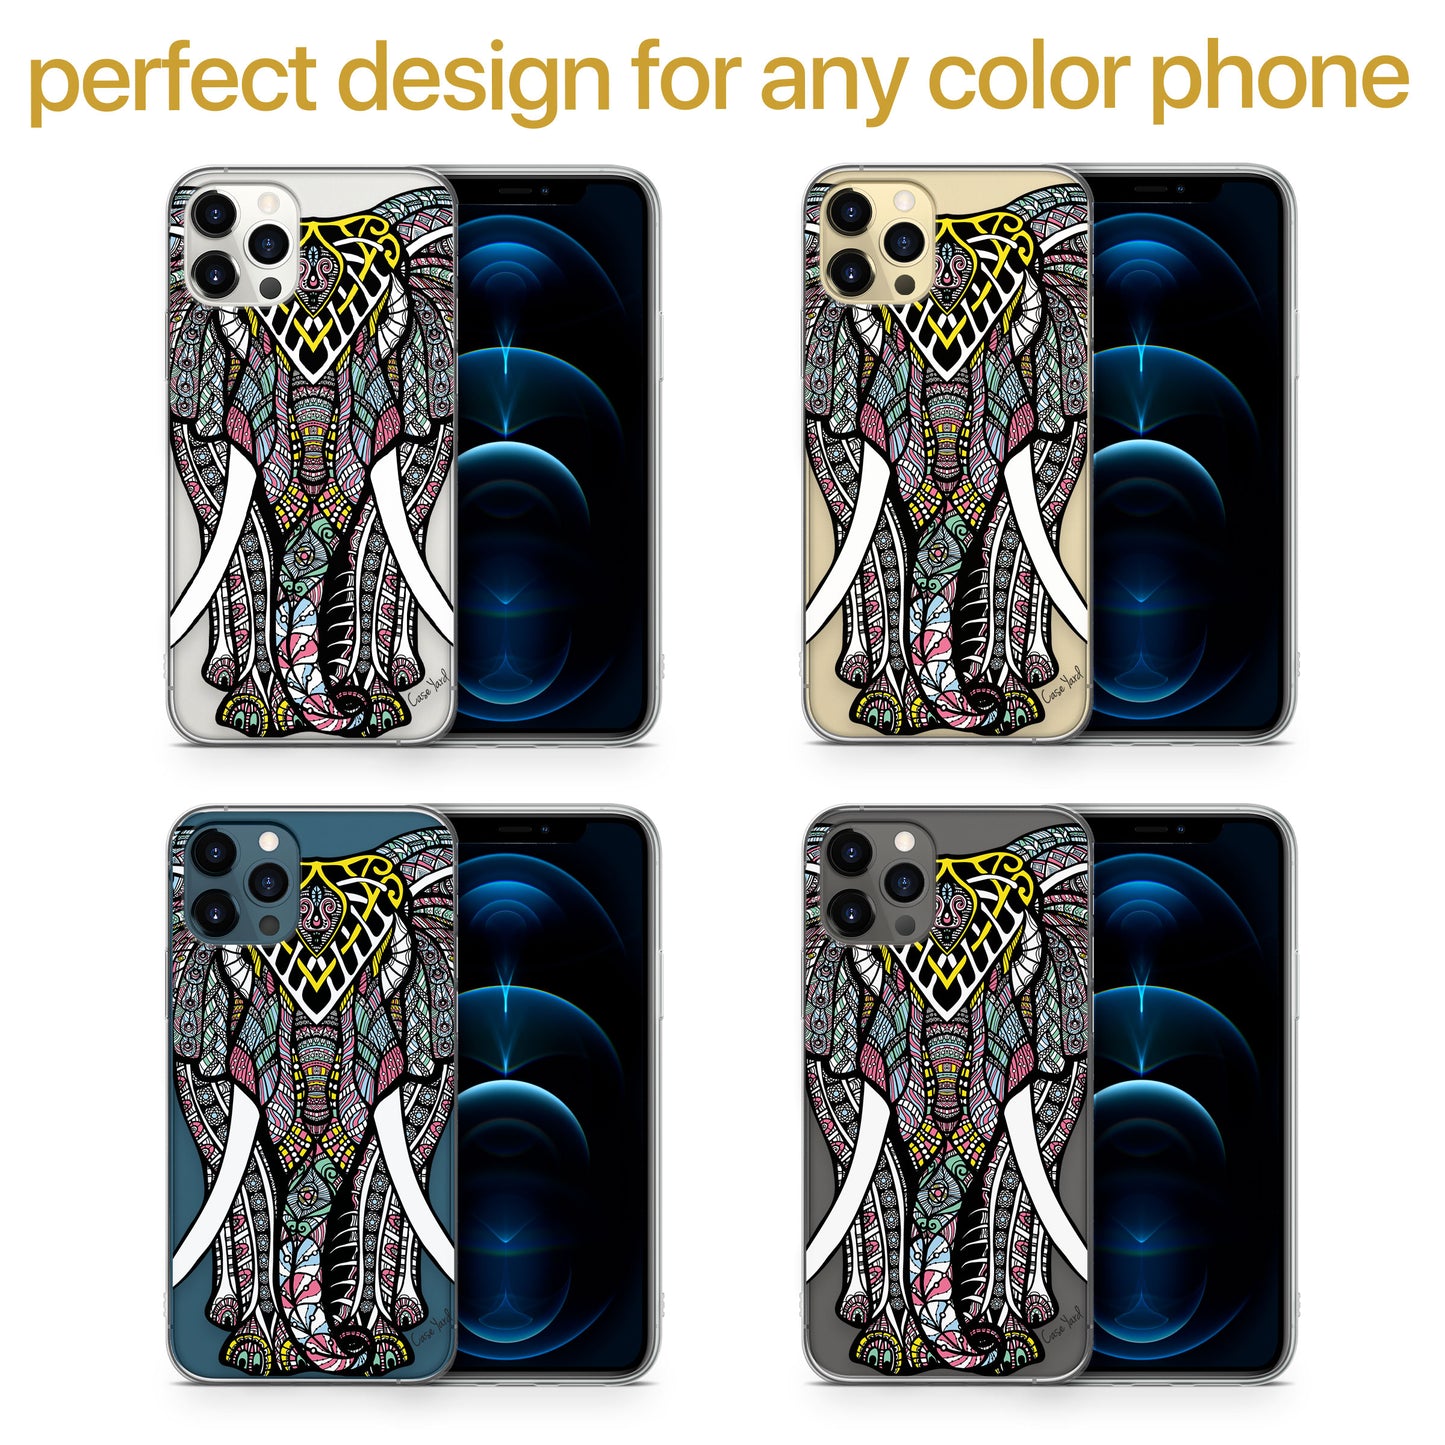 TPU Clear case with (Zen Elephant) Design for iPhone & Samsung Phones